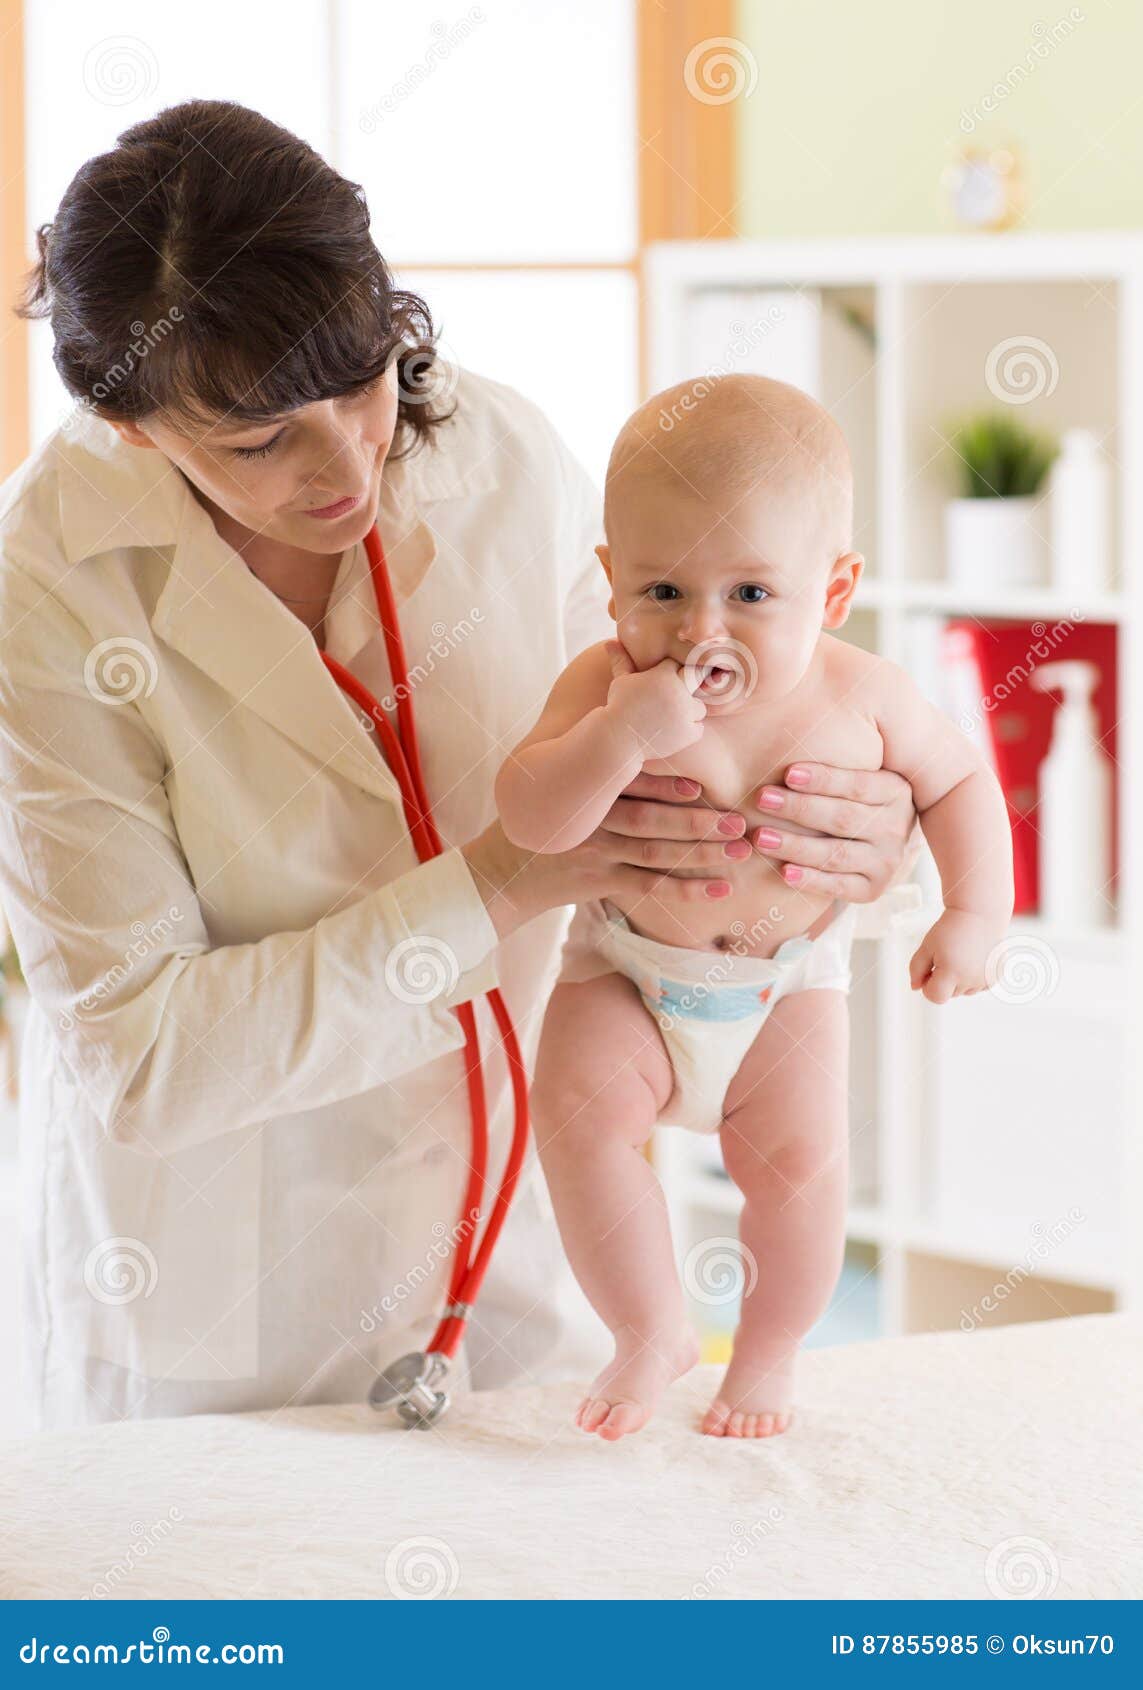 Doctor Examining A Baby In A Hospital Stock Image Image Of Hand